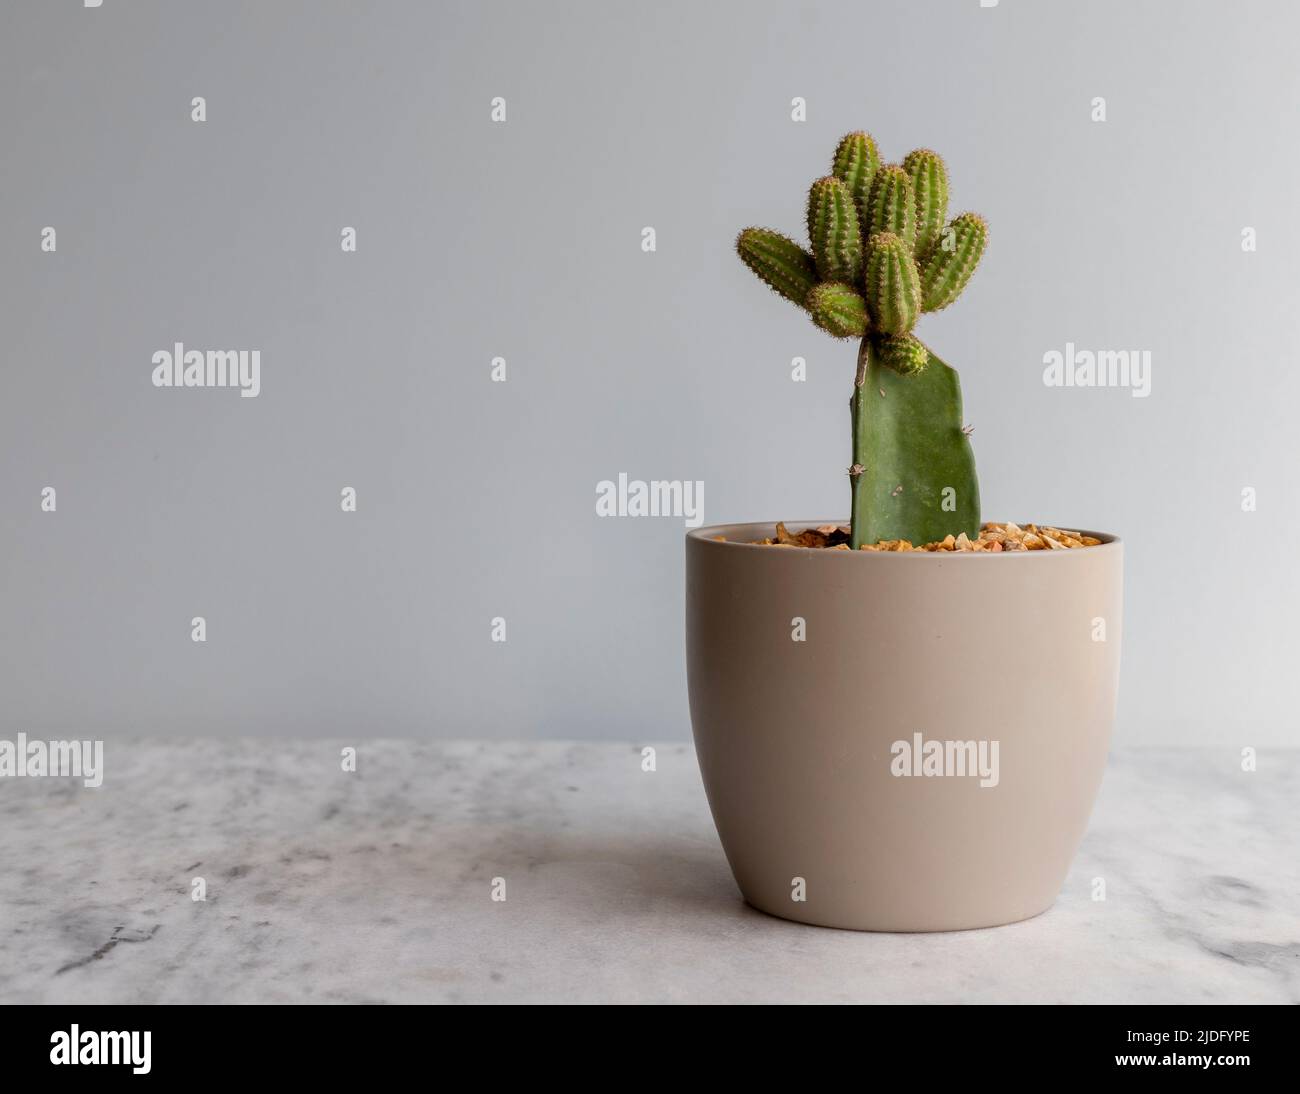 Peanut cactus grafted on a rootstock Stock Photo